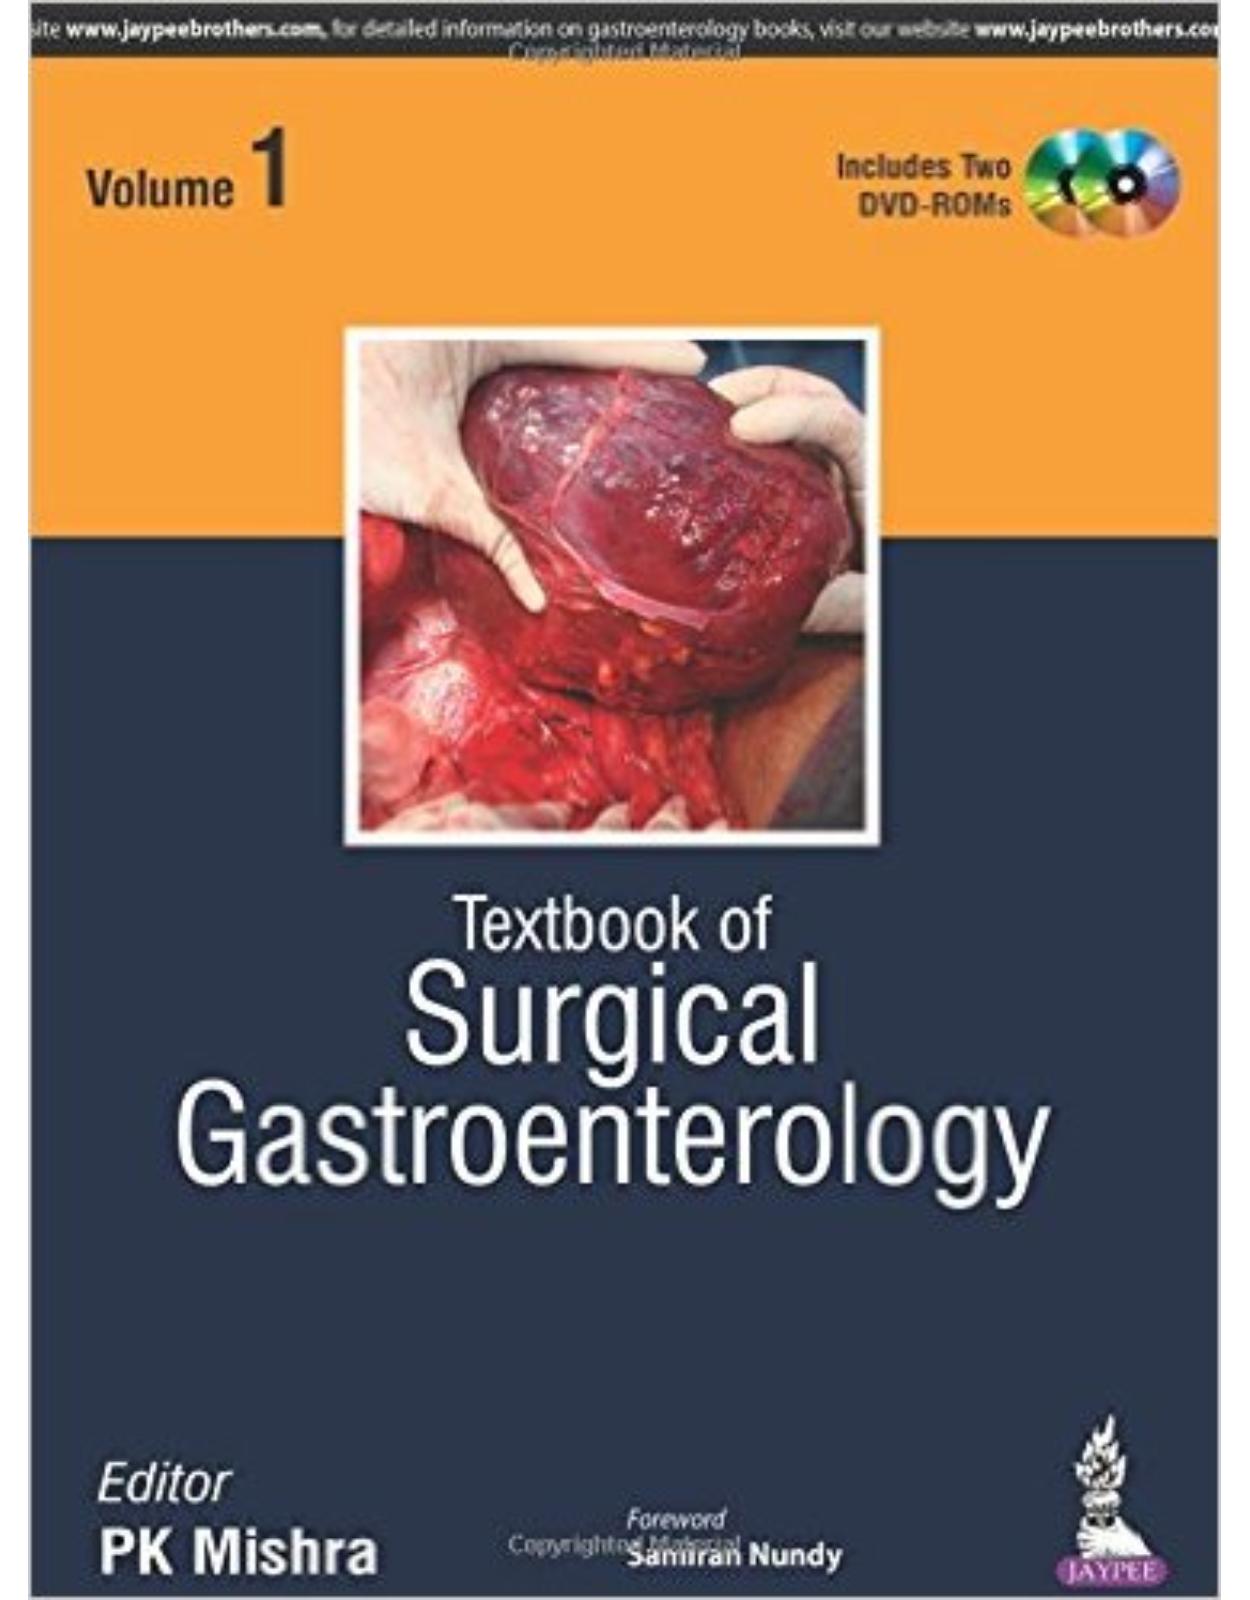 Textbook of Surgical Gastroenterology, Two Volumes